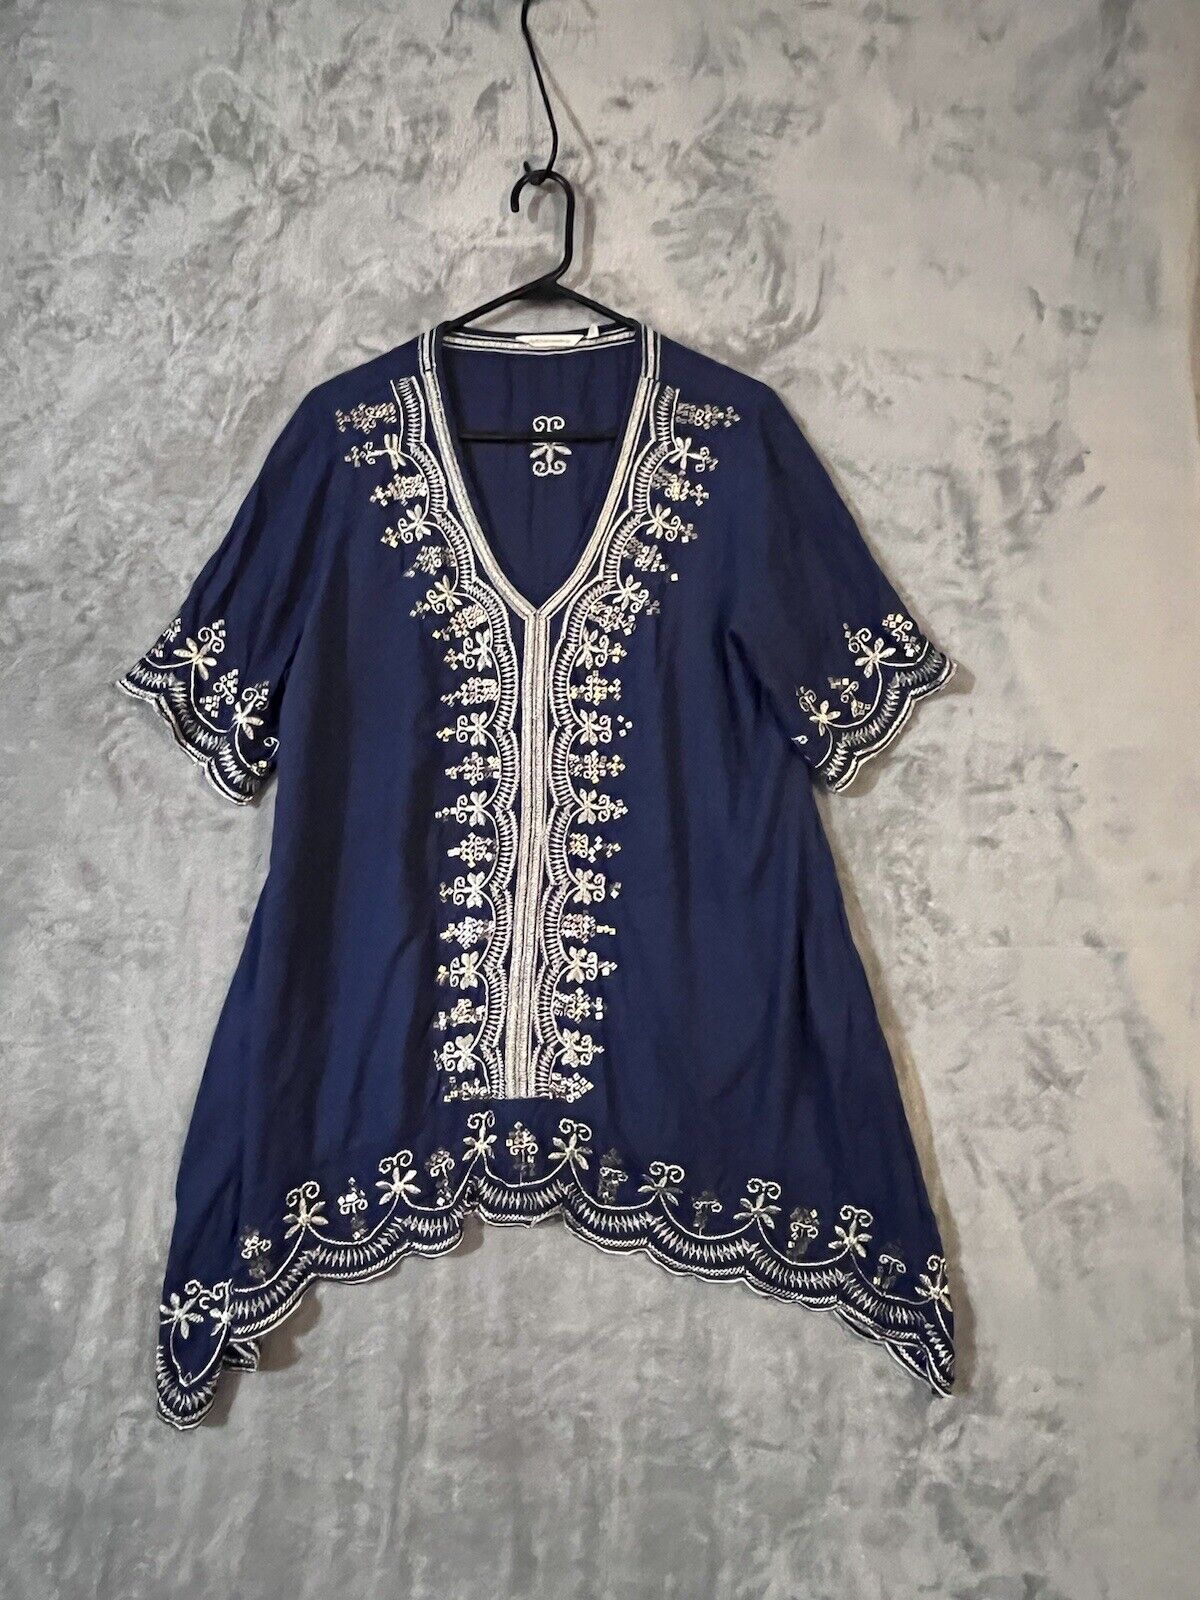 Soft Surroundings Embroidered Beaded V-Neck Navy Tunic Blouse Top Size XL